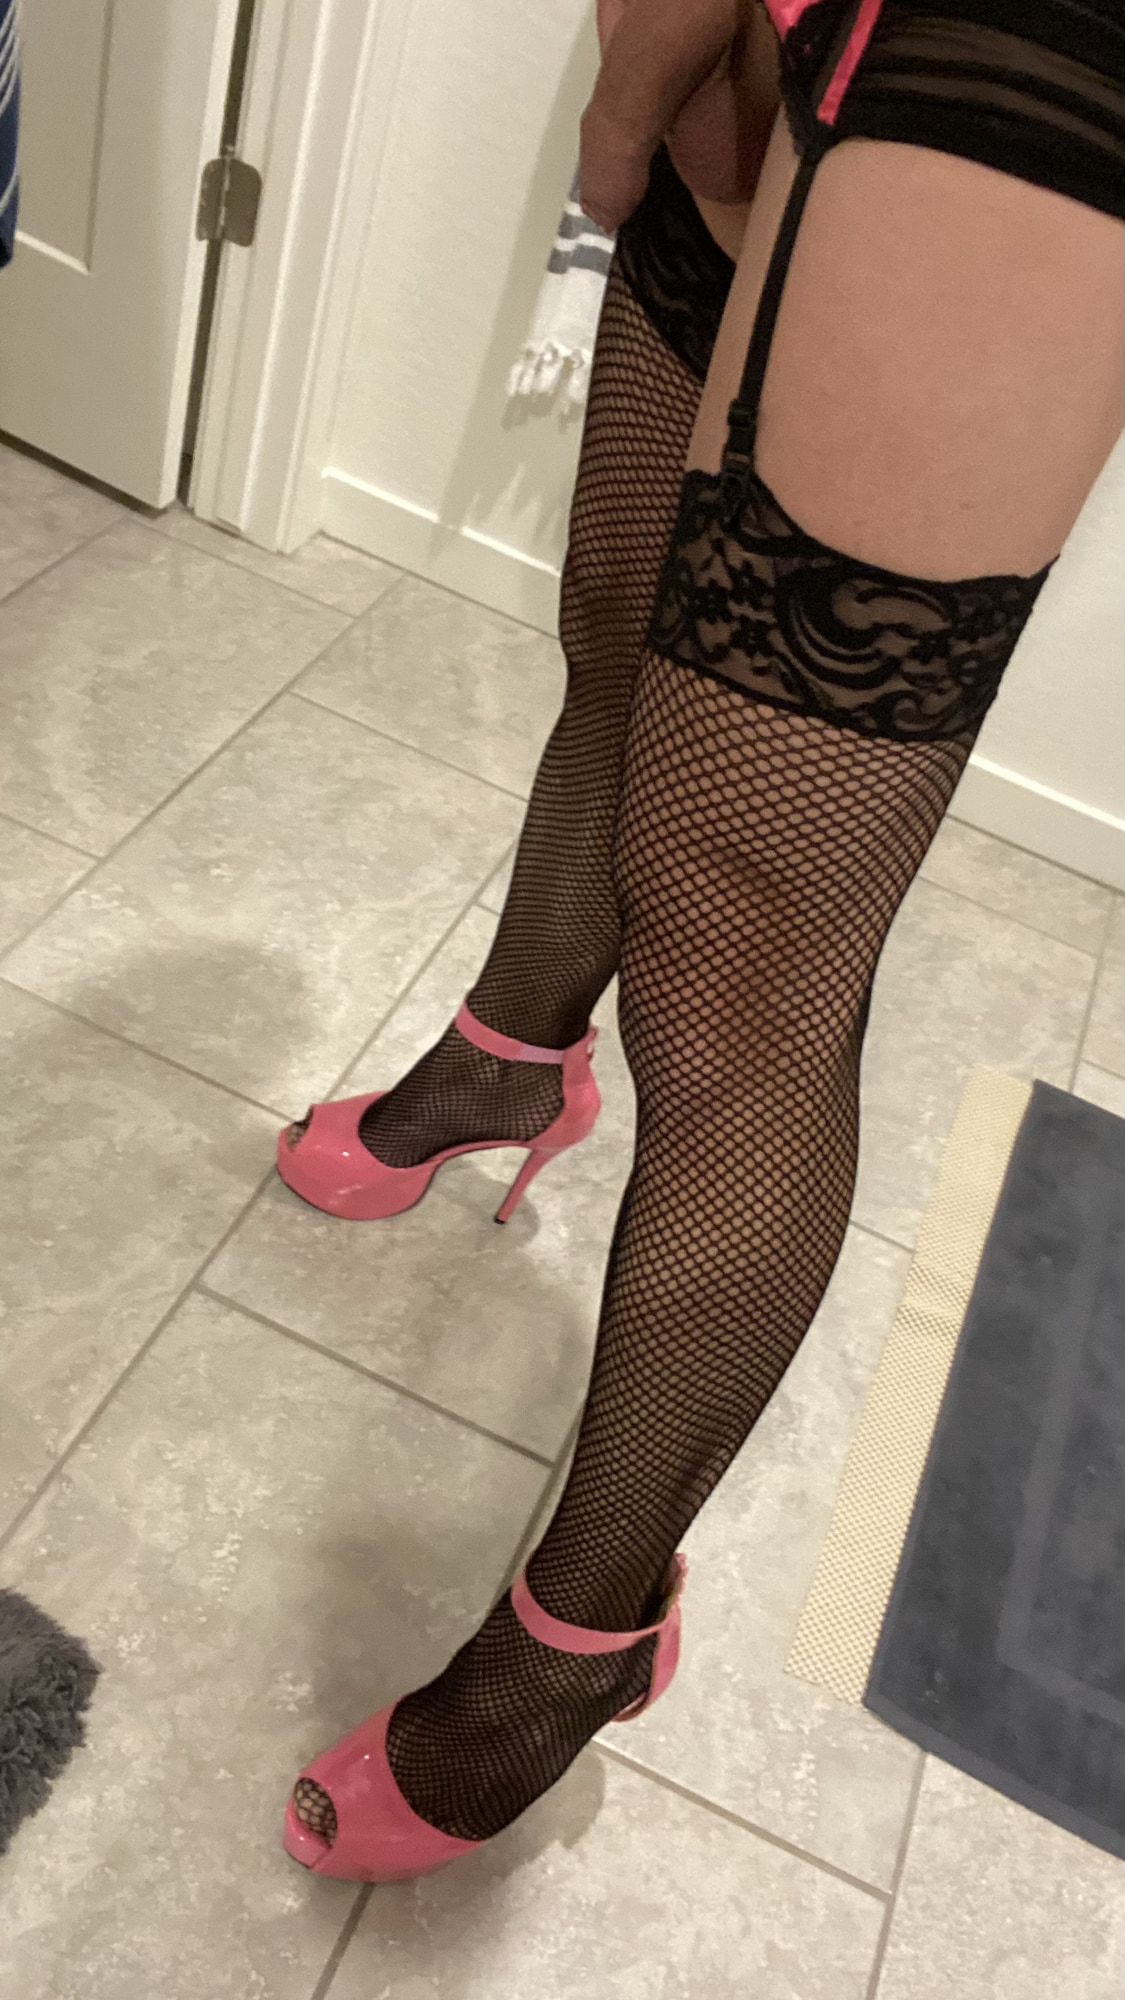 Sissy in pink heels and lingerie  #4